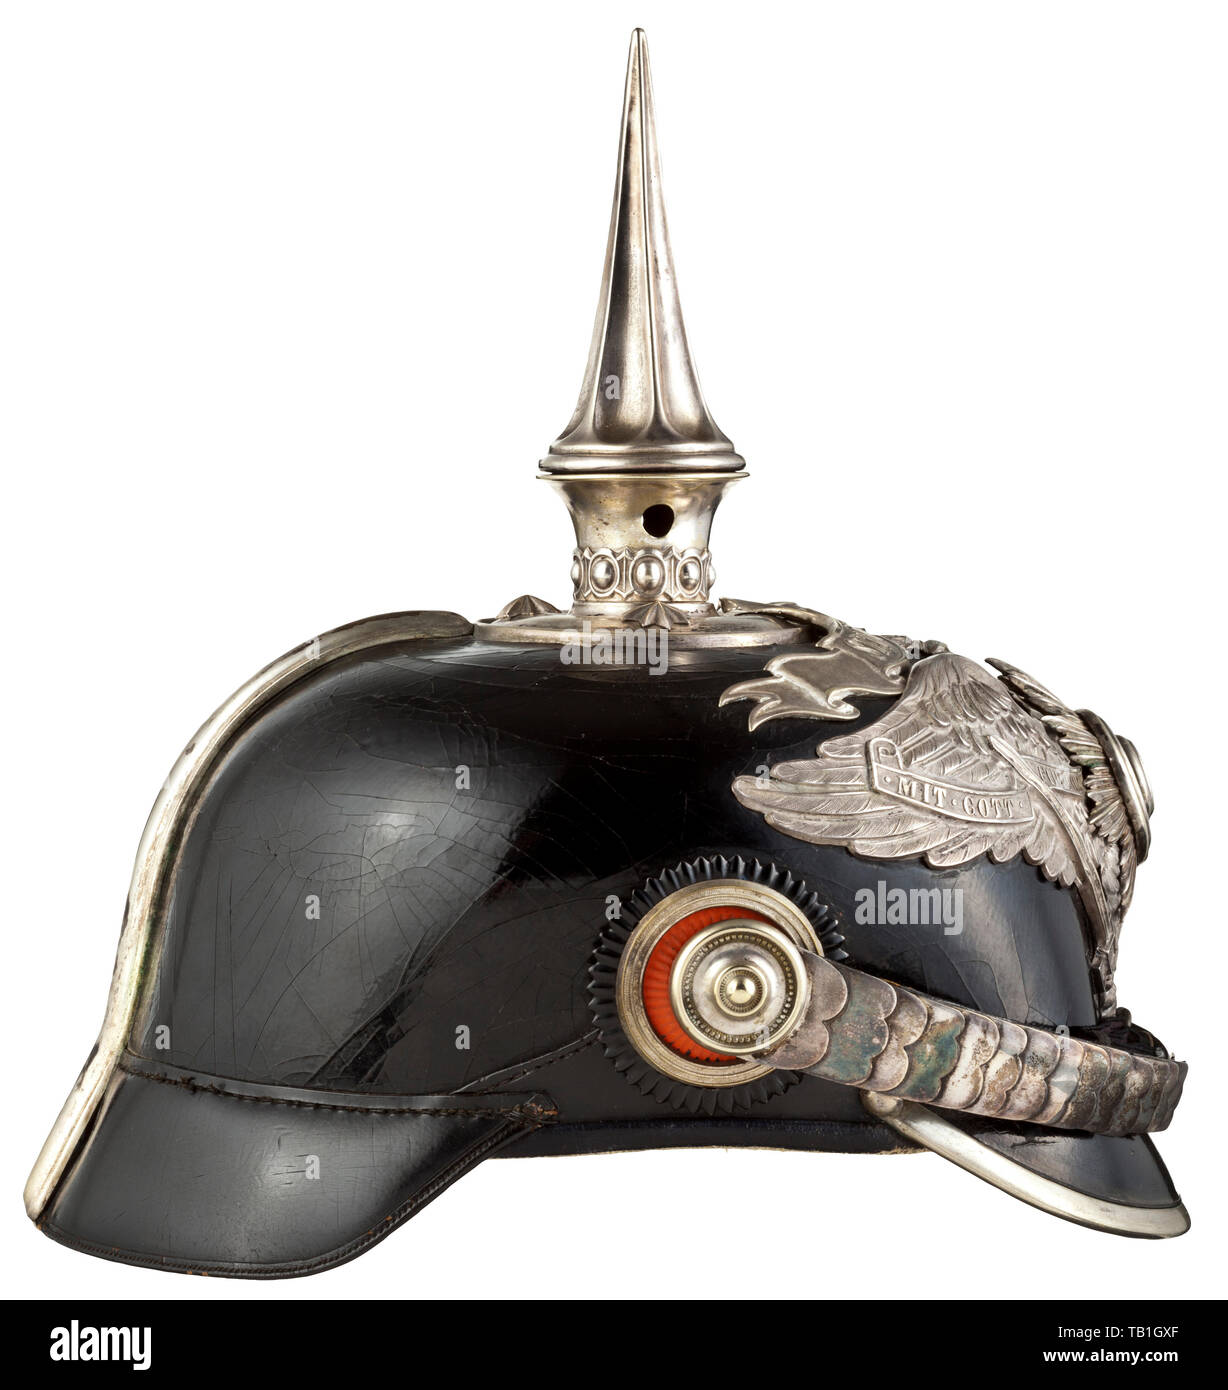 Prince Oskar of Prussia (1888 - 1958) - a helmet as officer in the 1st Foot Guard Regiment, Body made of black patent leather (brittle), silver fittings. Eagle emblem with applied, enamelled guard star ('Suum Cuique'), surmounted by the script banner 'Semper Talis', flat chinscales on officer's cockades, high fluted spike (unscrewable), pearl ring, circular crown plate with star screws. White silk lining and white leather sweatband, inside the body manufacturer's label 'Ed. Schultze, Königl. Hoflieferant, Potsdam'. With helmet cover made of field, Additional-Rights-Clearance-Info-Not-Available Stock Photo